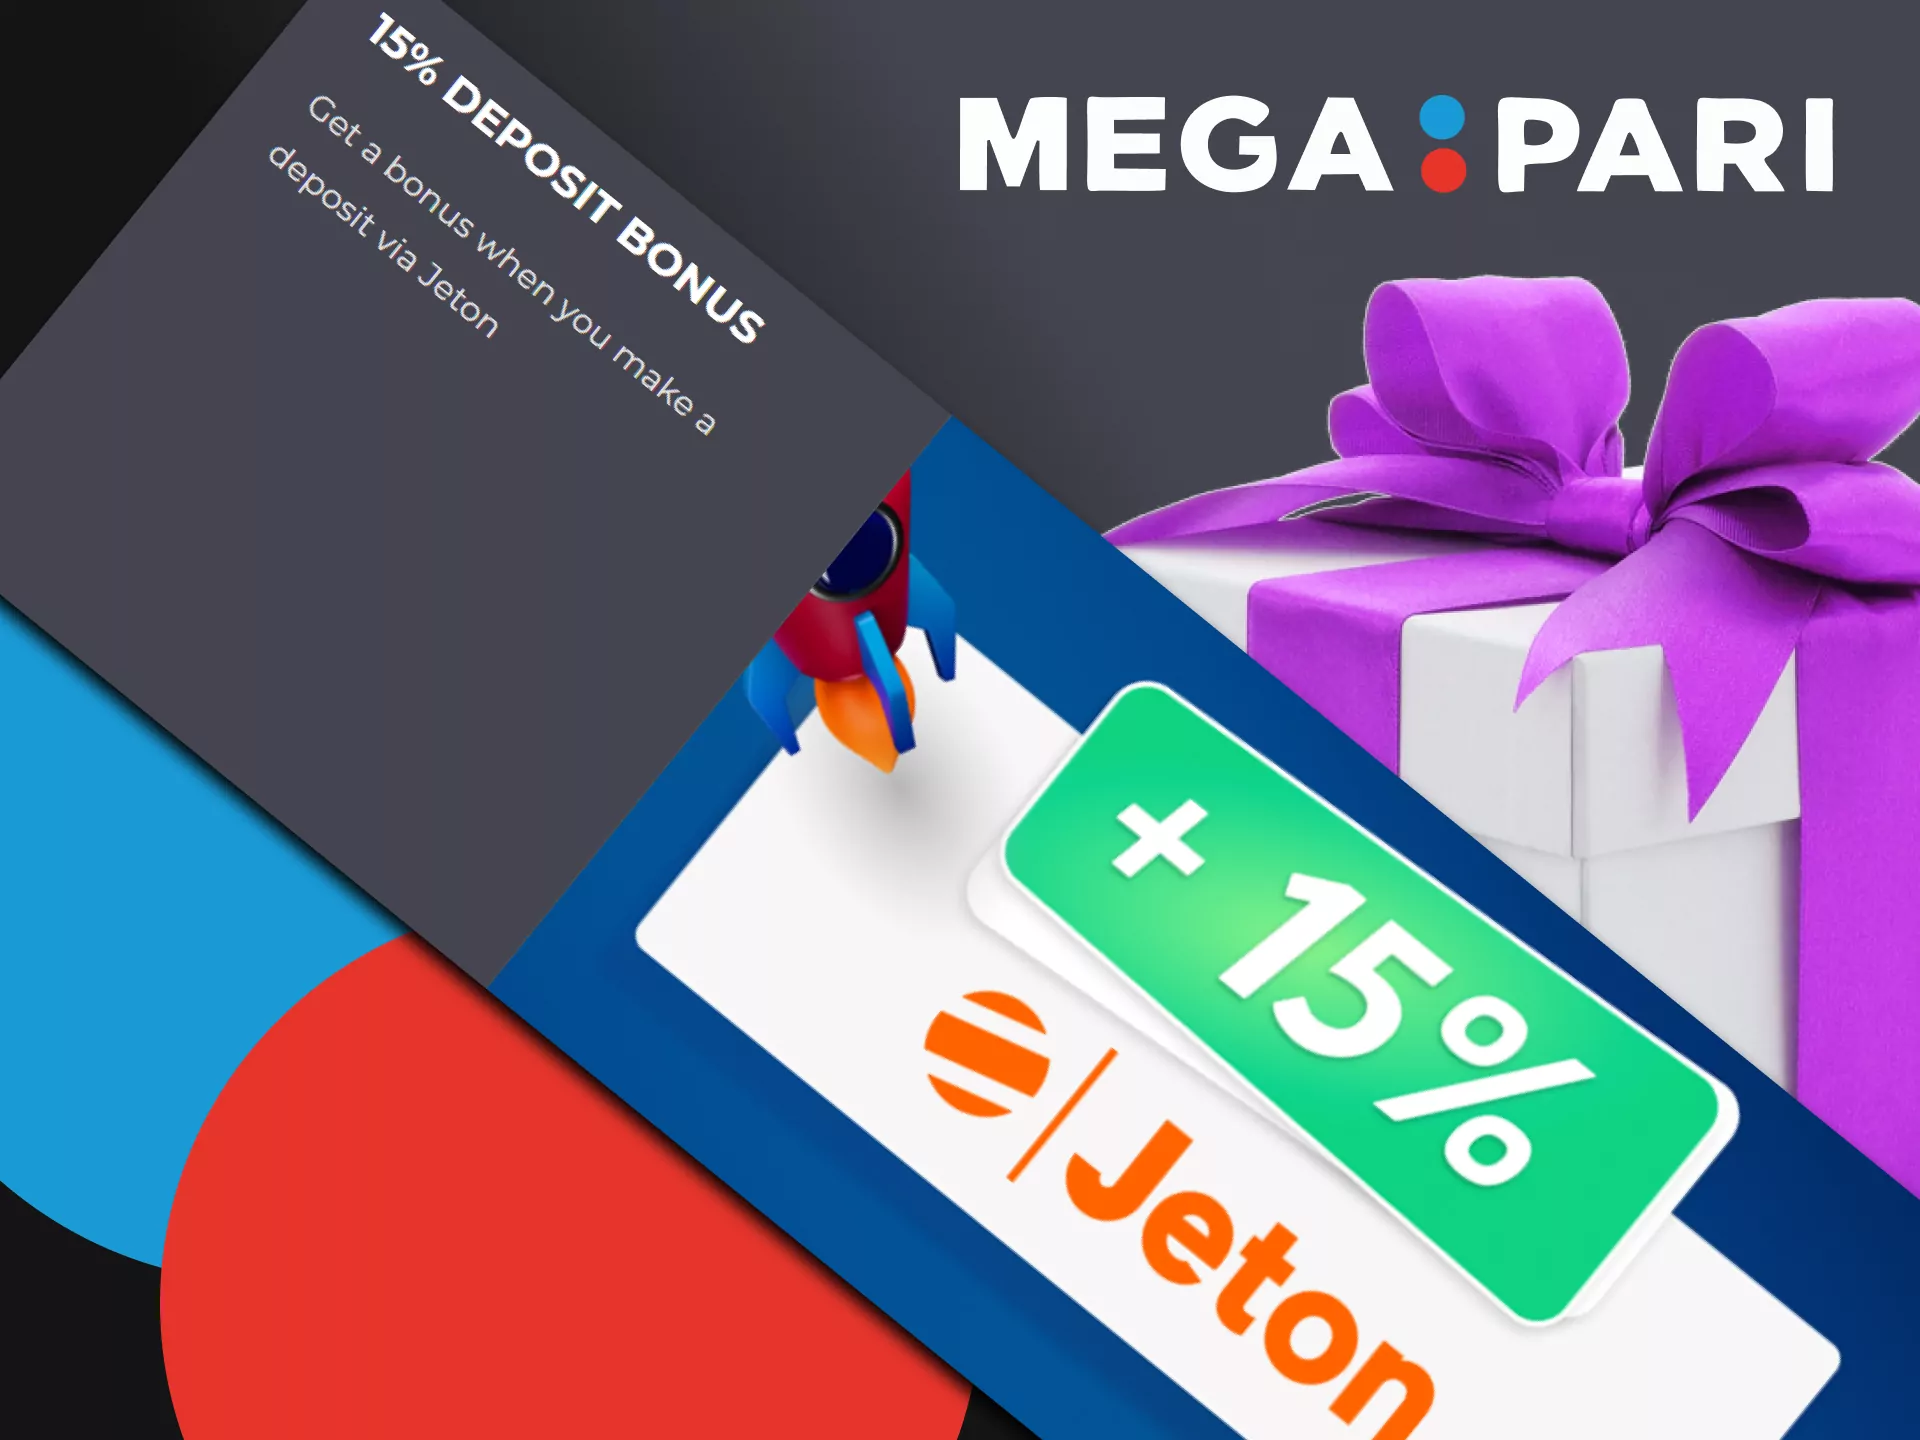 Make the first deposit and get a Megapari bonus of 15% as a free bet.